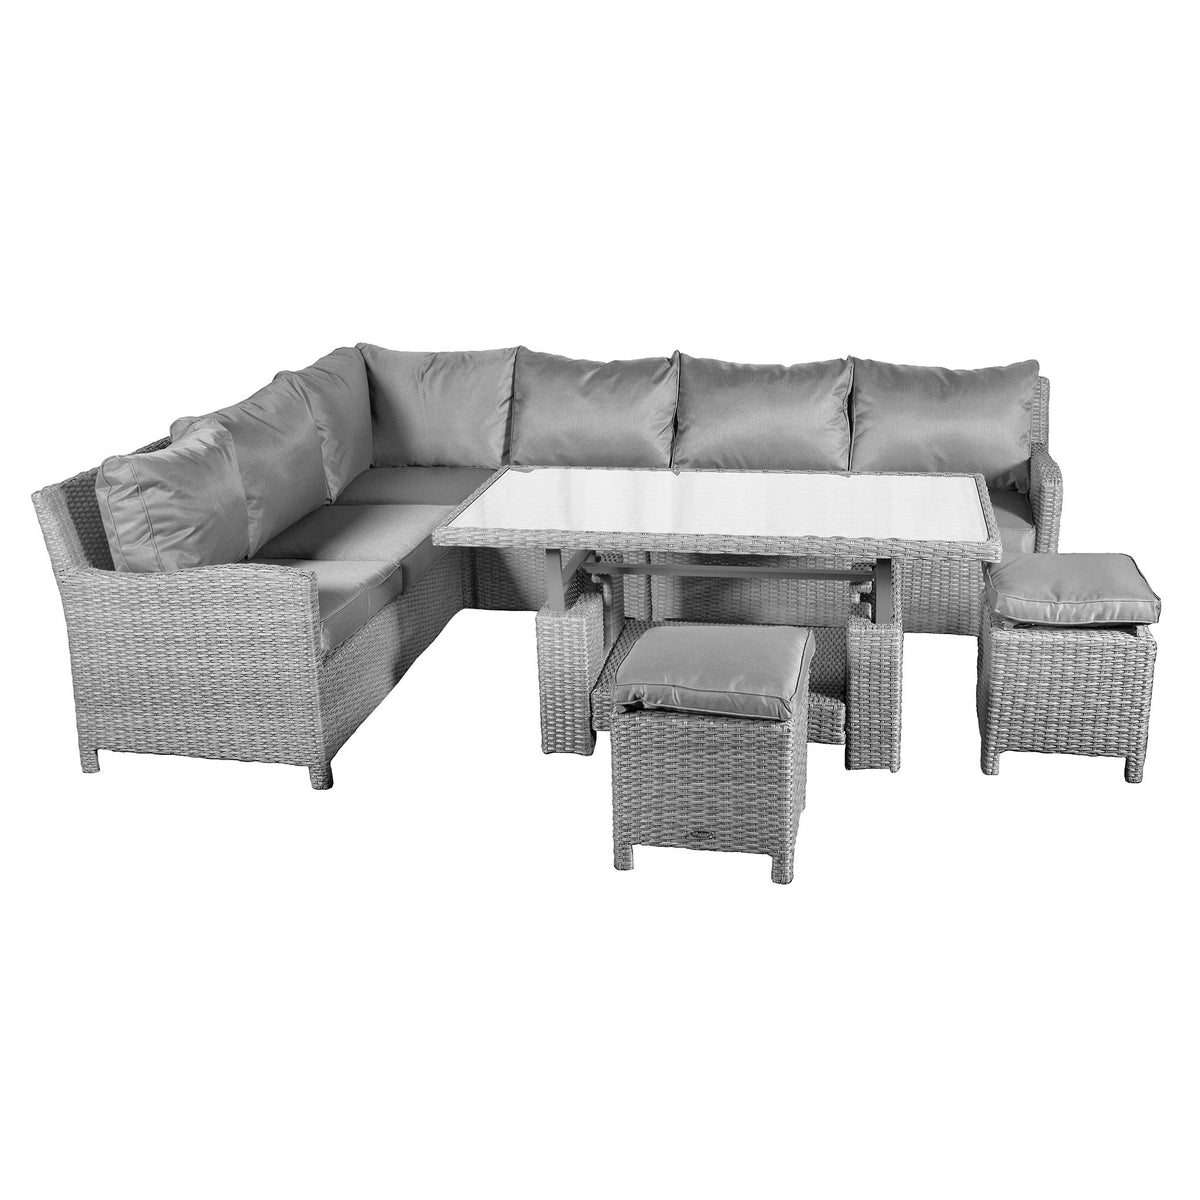 Paris Rattan Lounge Dining Set with Rise and Fall Table